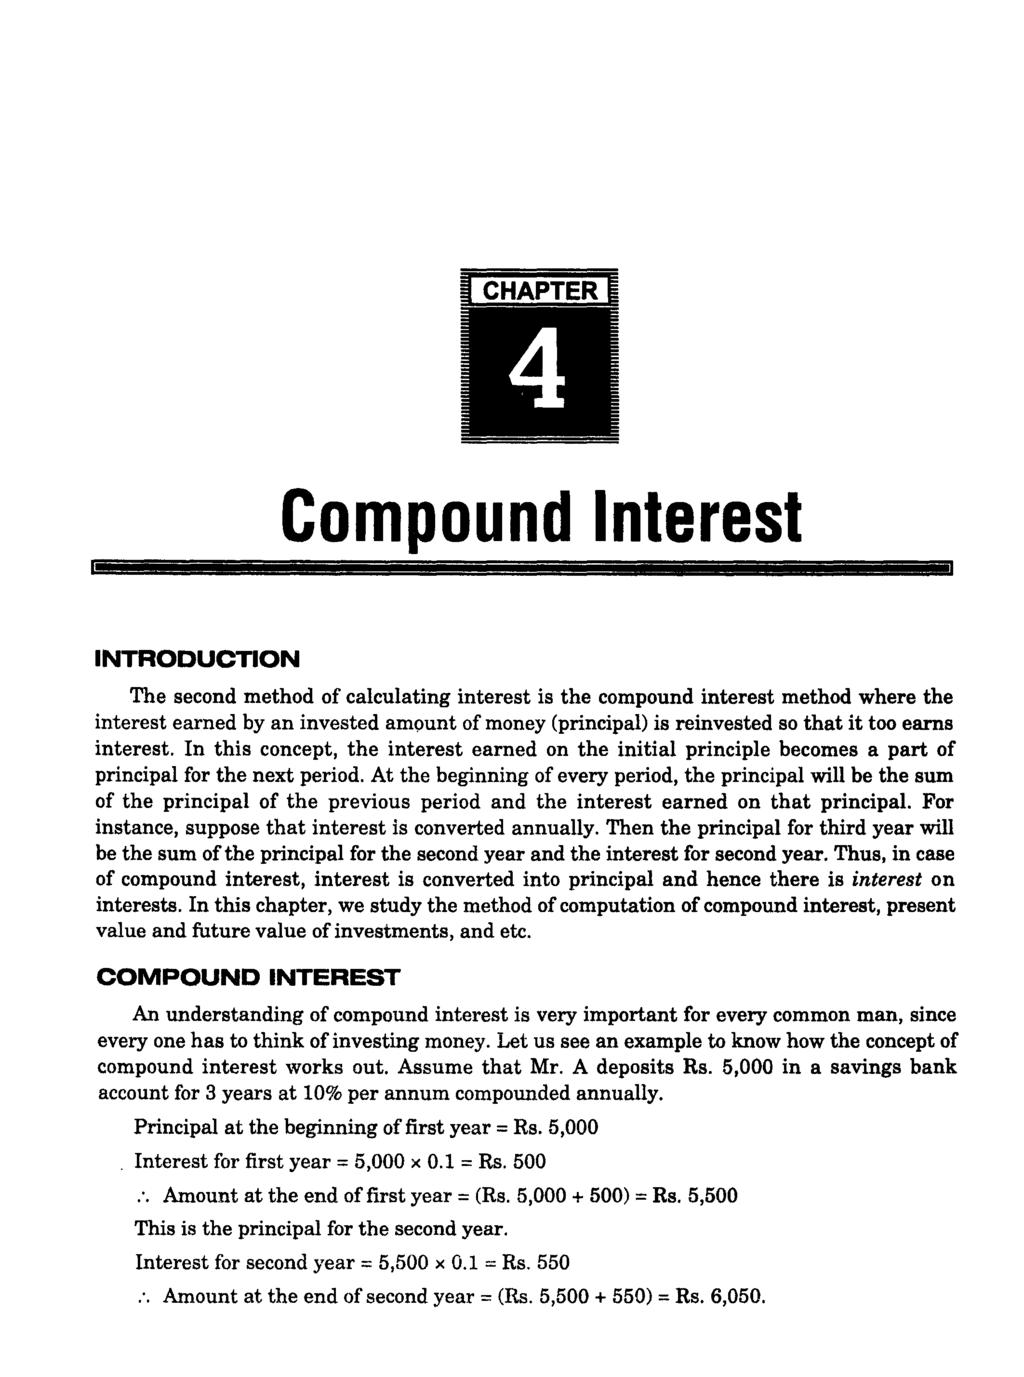 Compound Interest INTRODUCTION The second method of calculating interest is the compound interest method where the interest earned by an invested amc;mnt of money (principal) is reinvested so that it